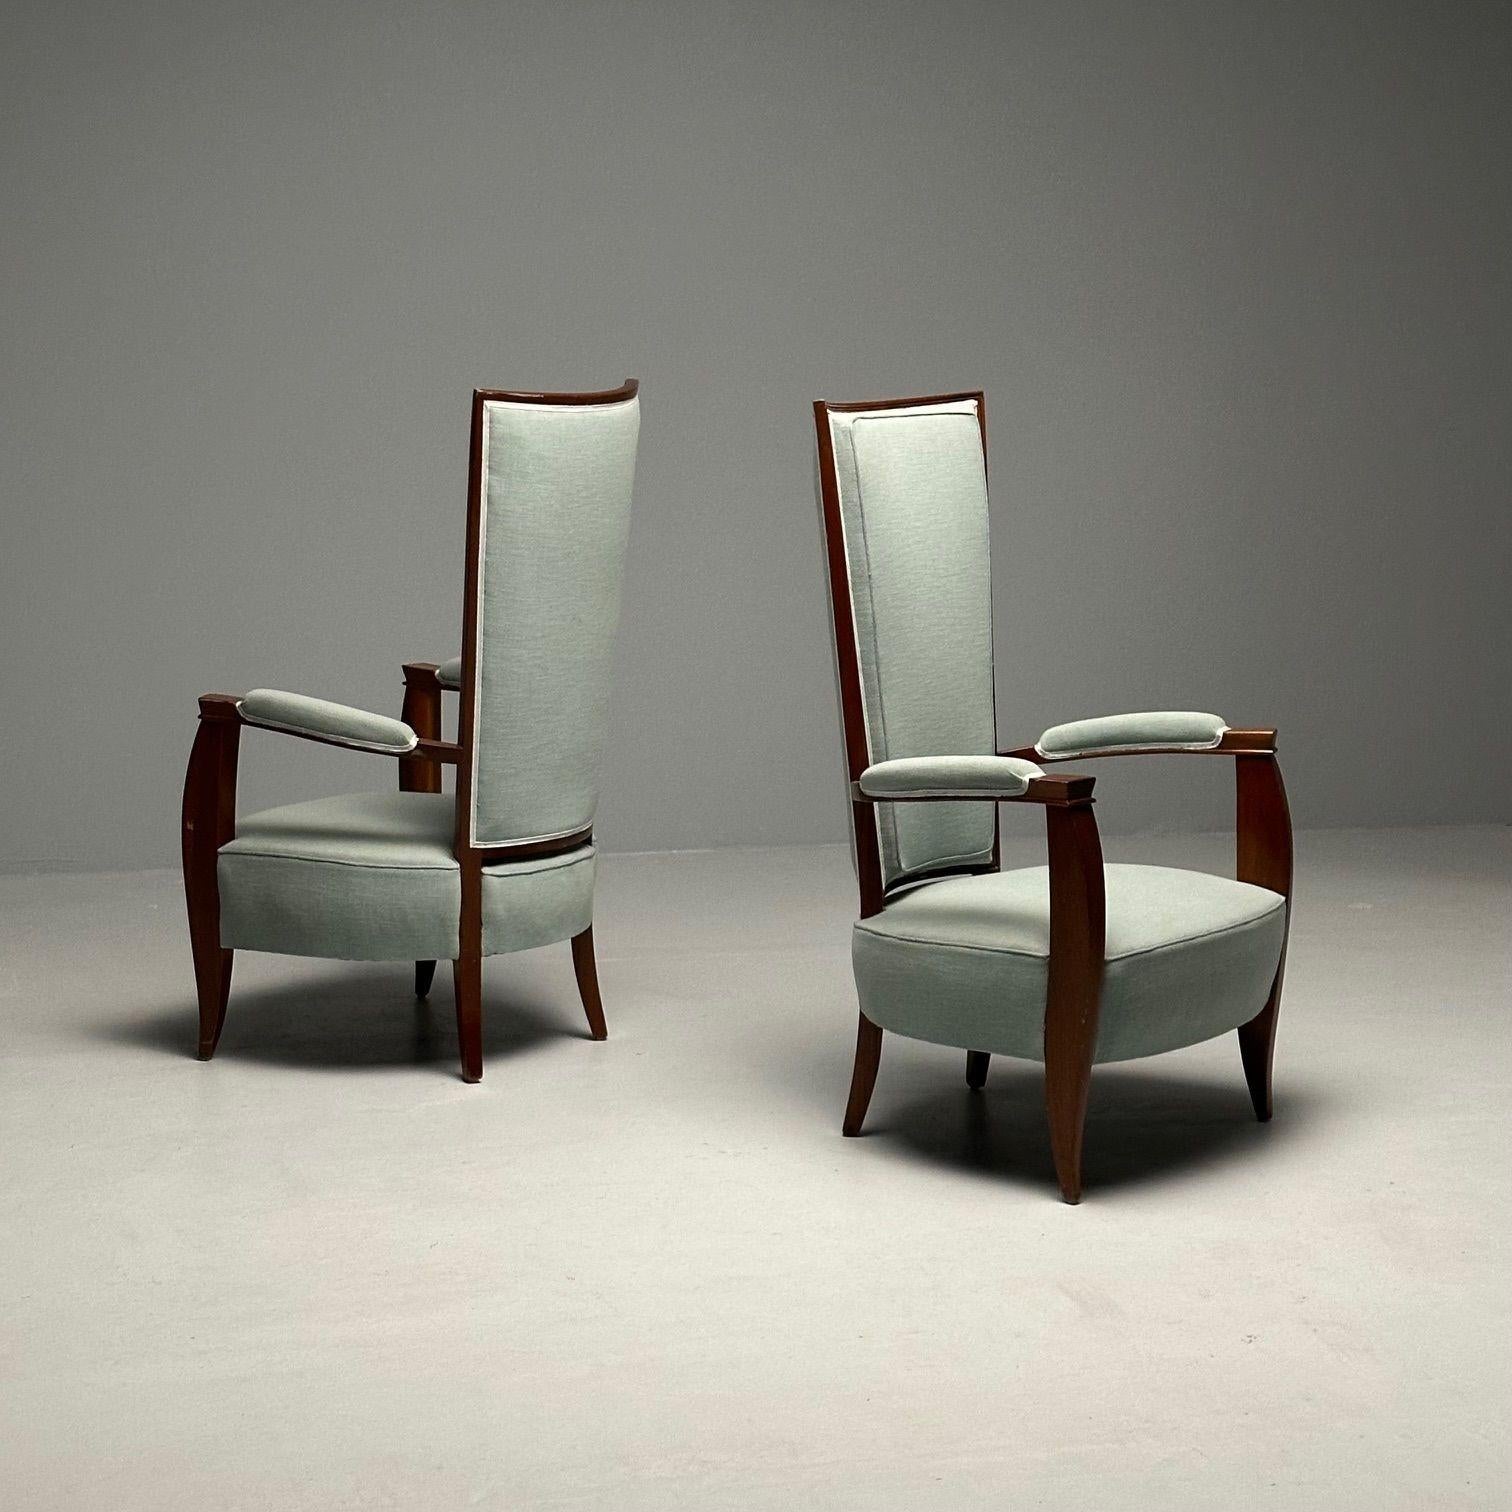 Late 20th Century French Art Deco, High-Back Chairs, Mahogany, Turqoise Linen, France, 1970s For Sale